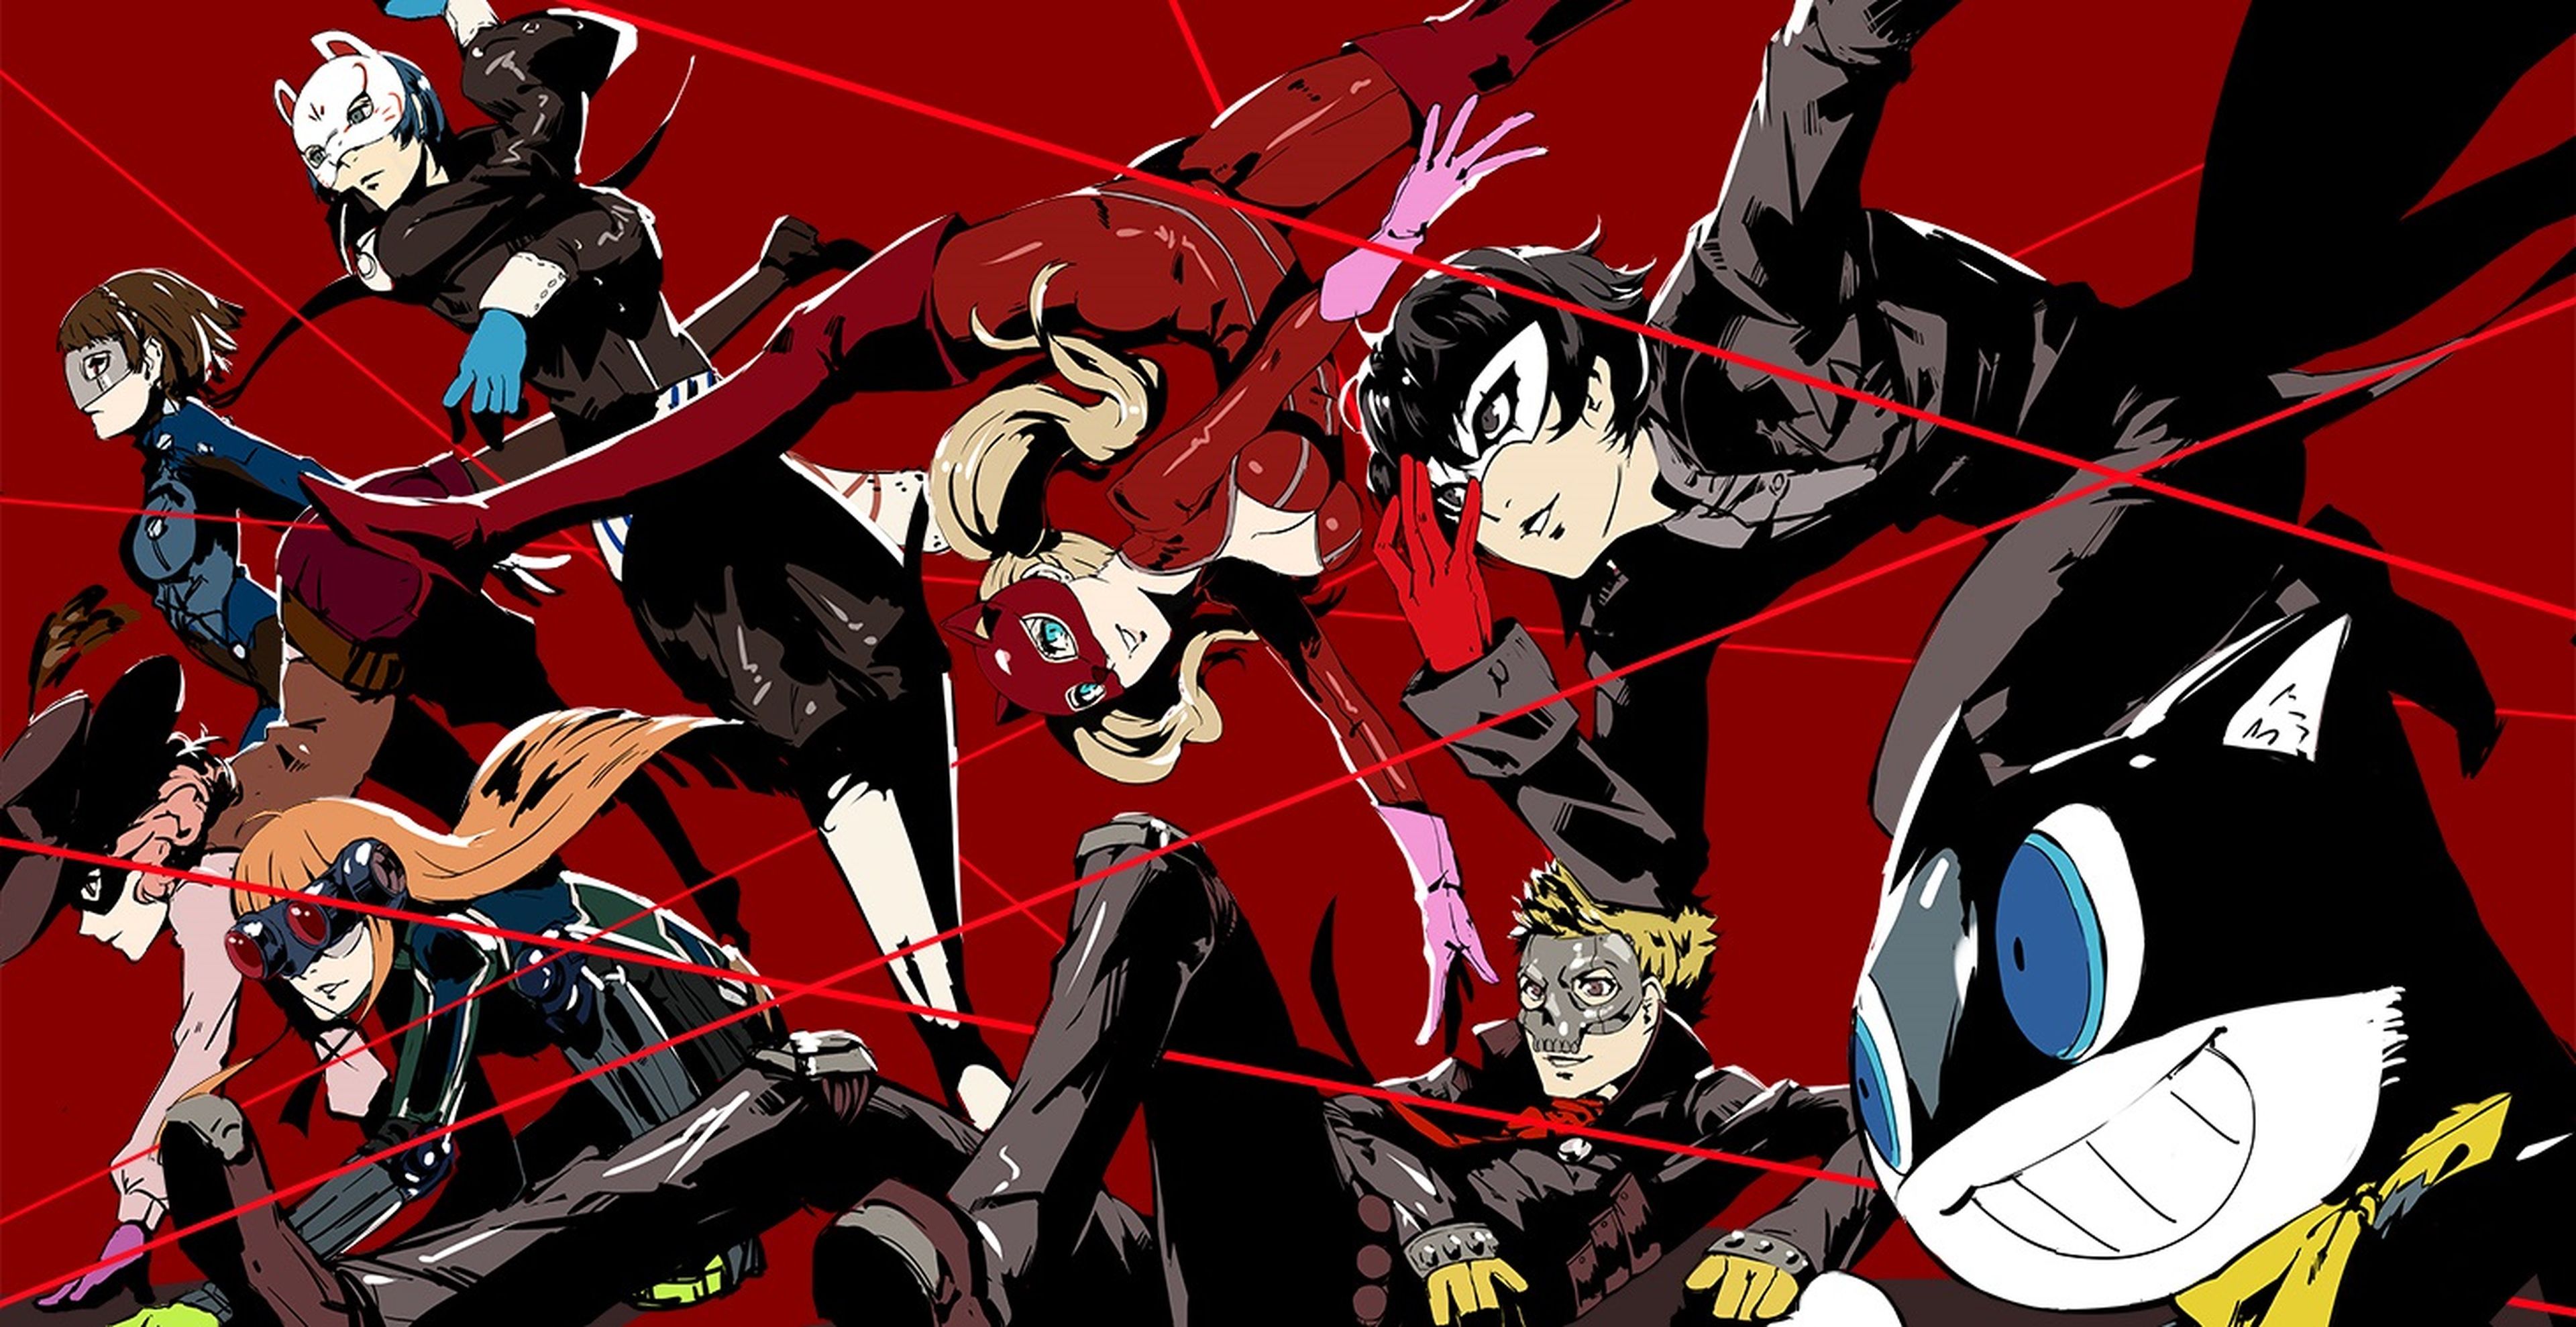 Persona 5 - Opening